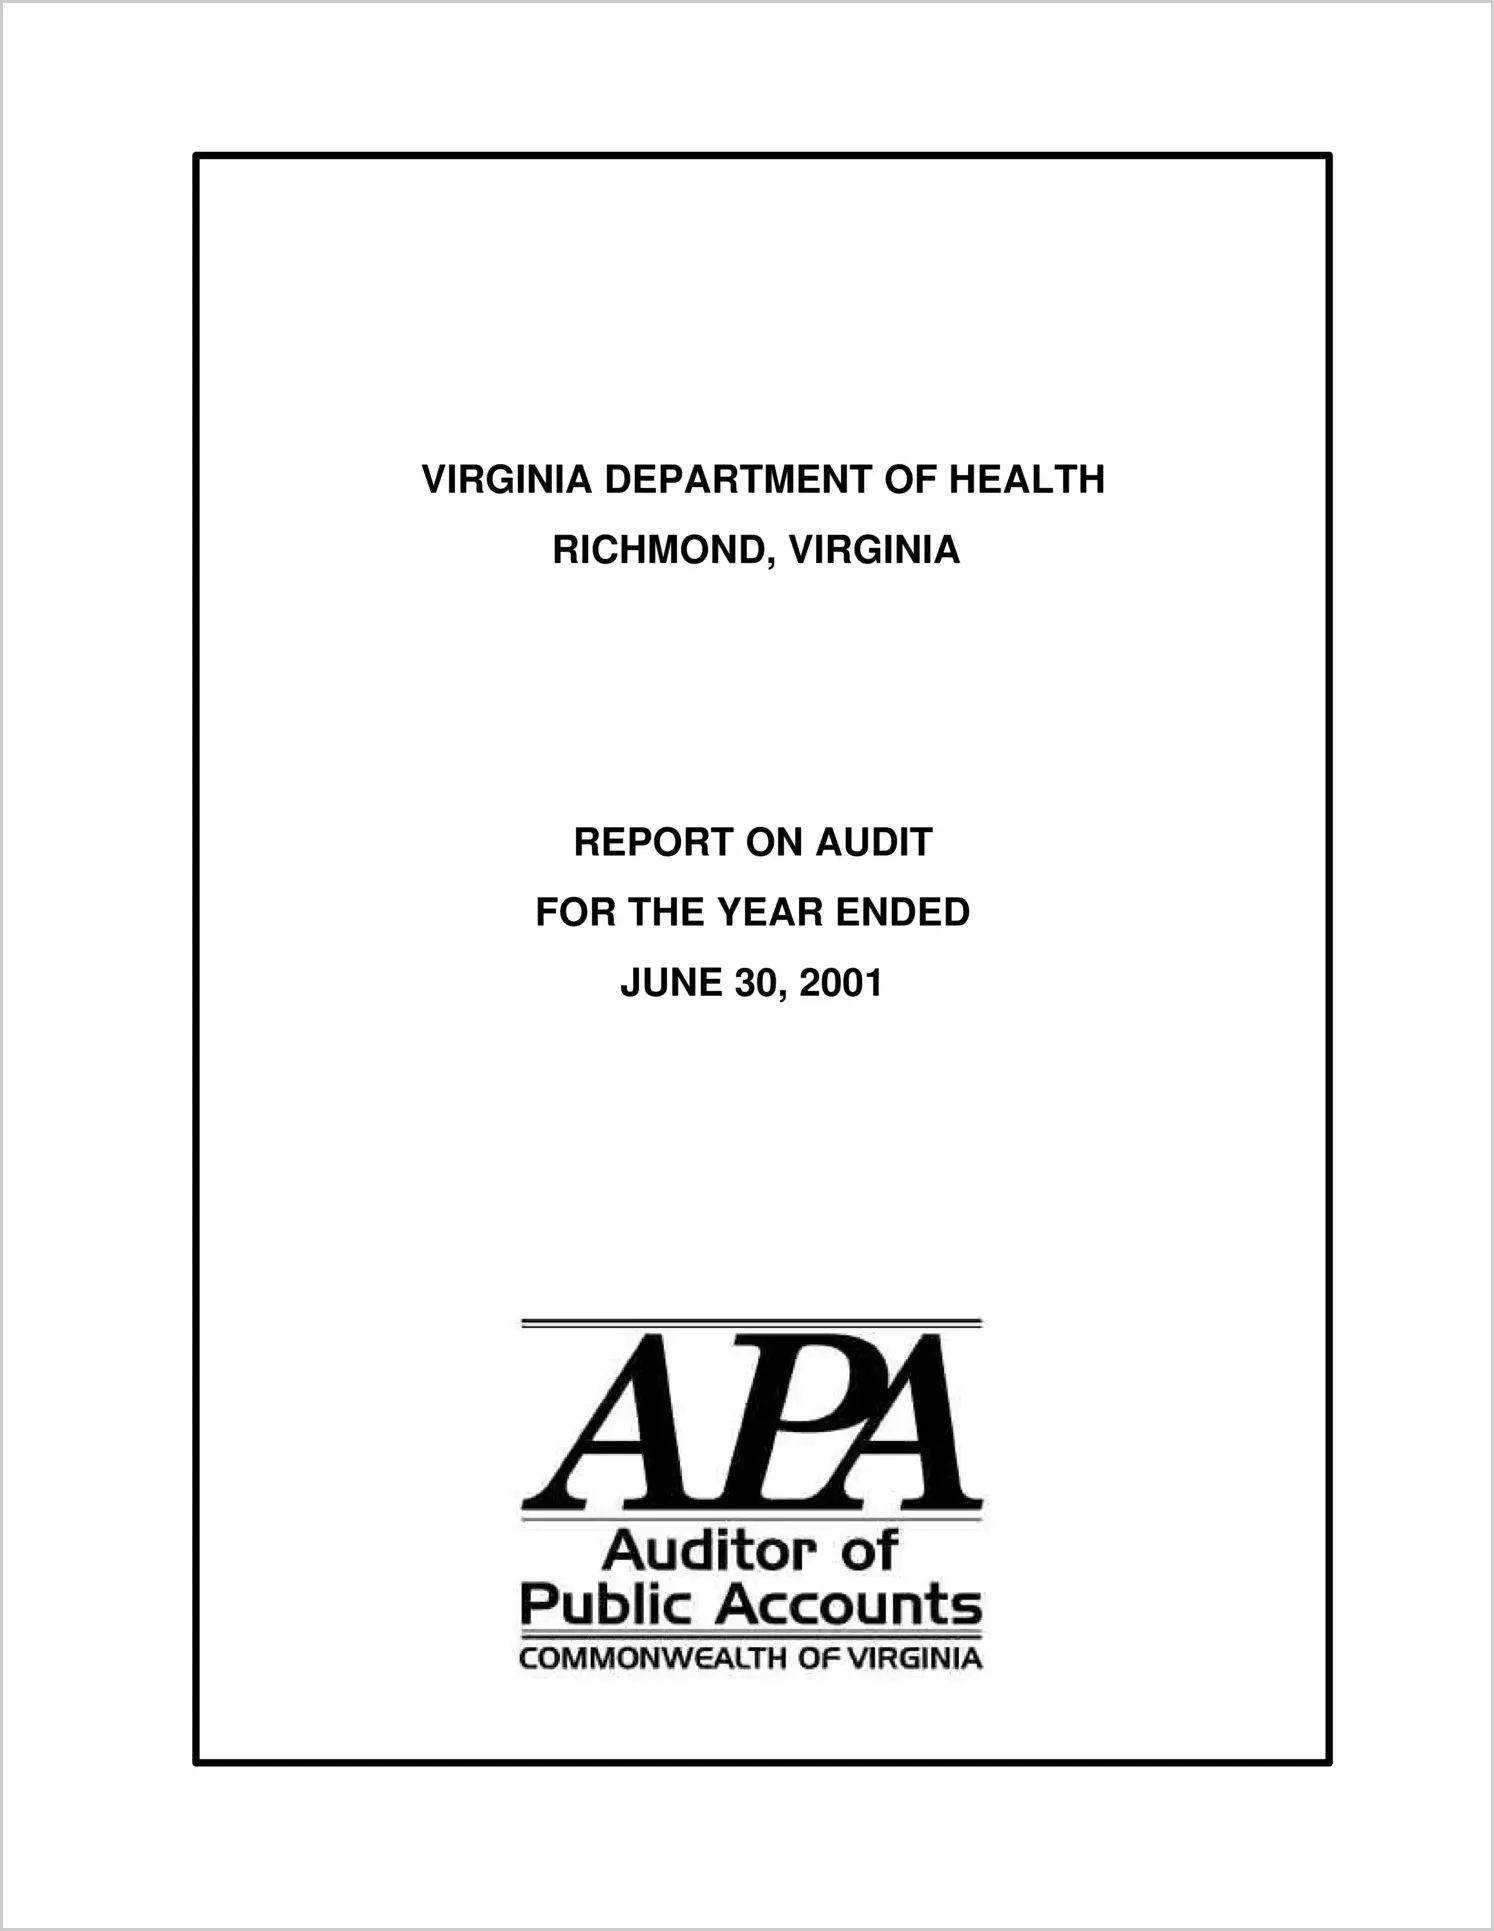 Department of Health for the year ended June 30, 2001